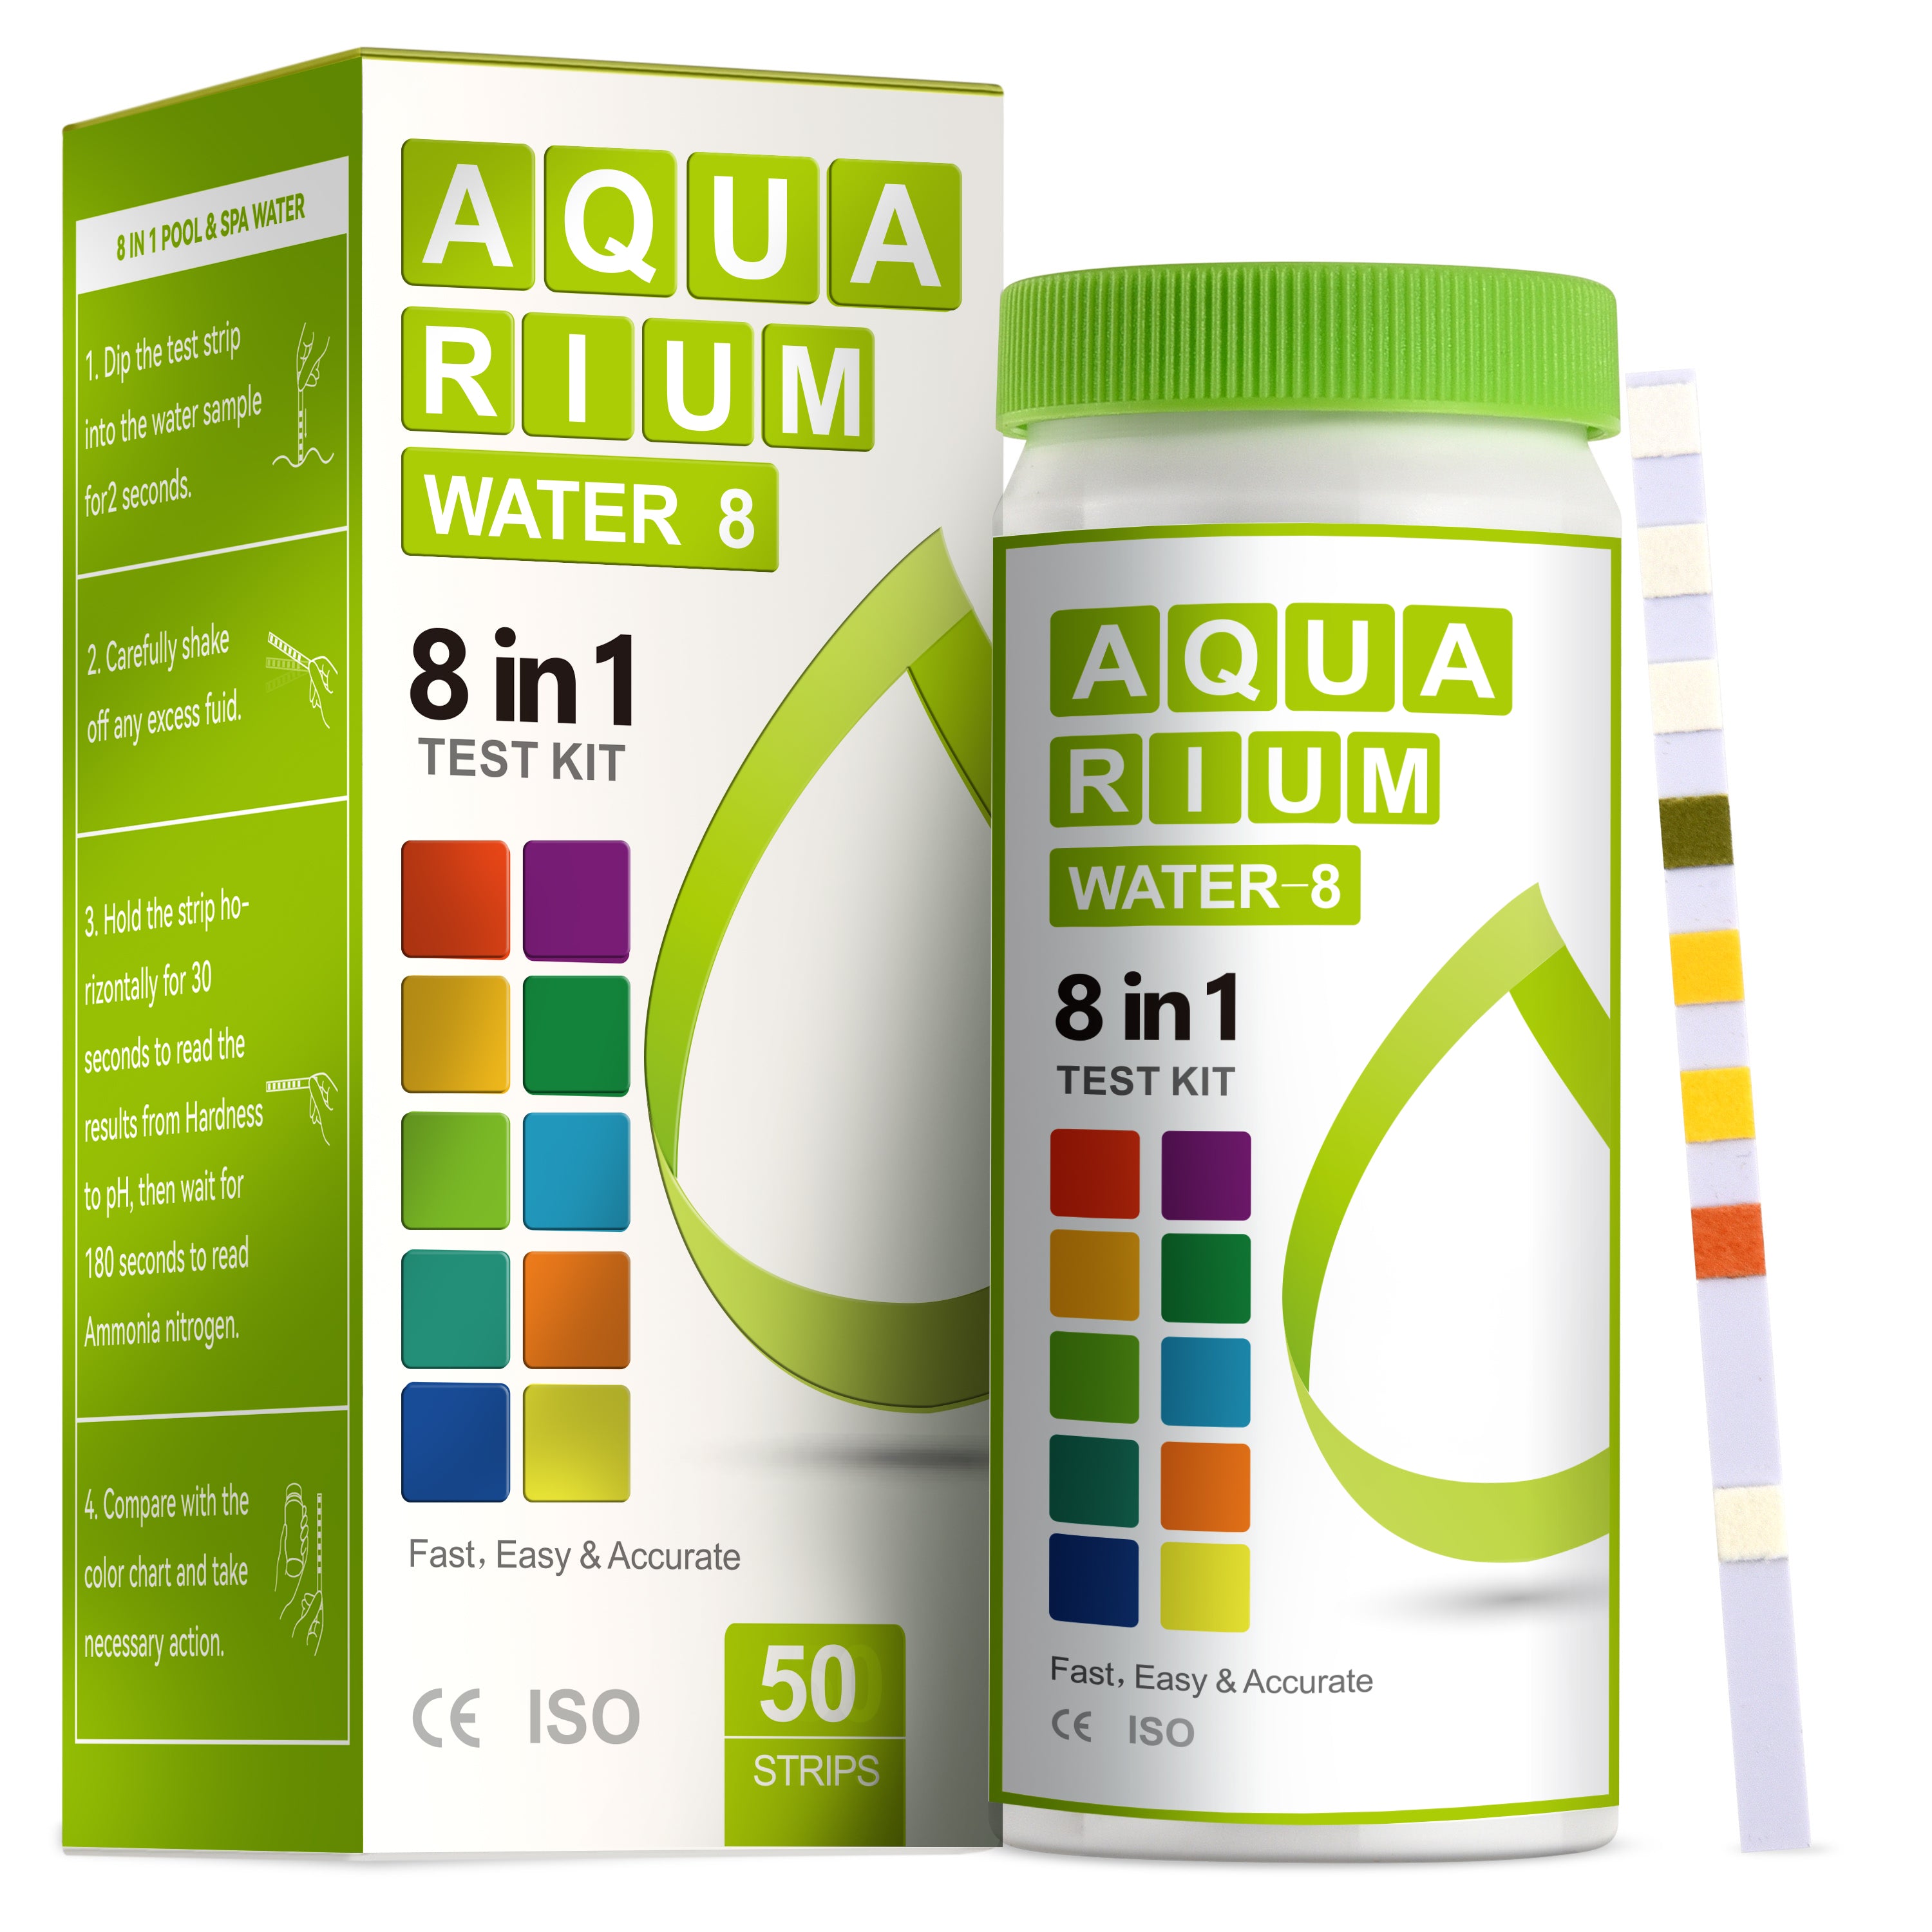 8-in-1 Aquarium Test Kit for Fish Tanks - Quick & Accurate Water Testing Strips for Aquariums & Ponds. Tests pH, Ammonia, Alkalinity, Hardness, Chlorine, etc. (K02-500)